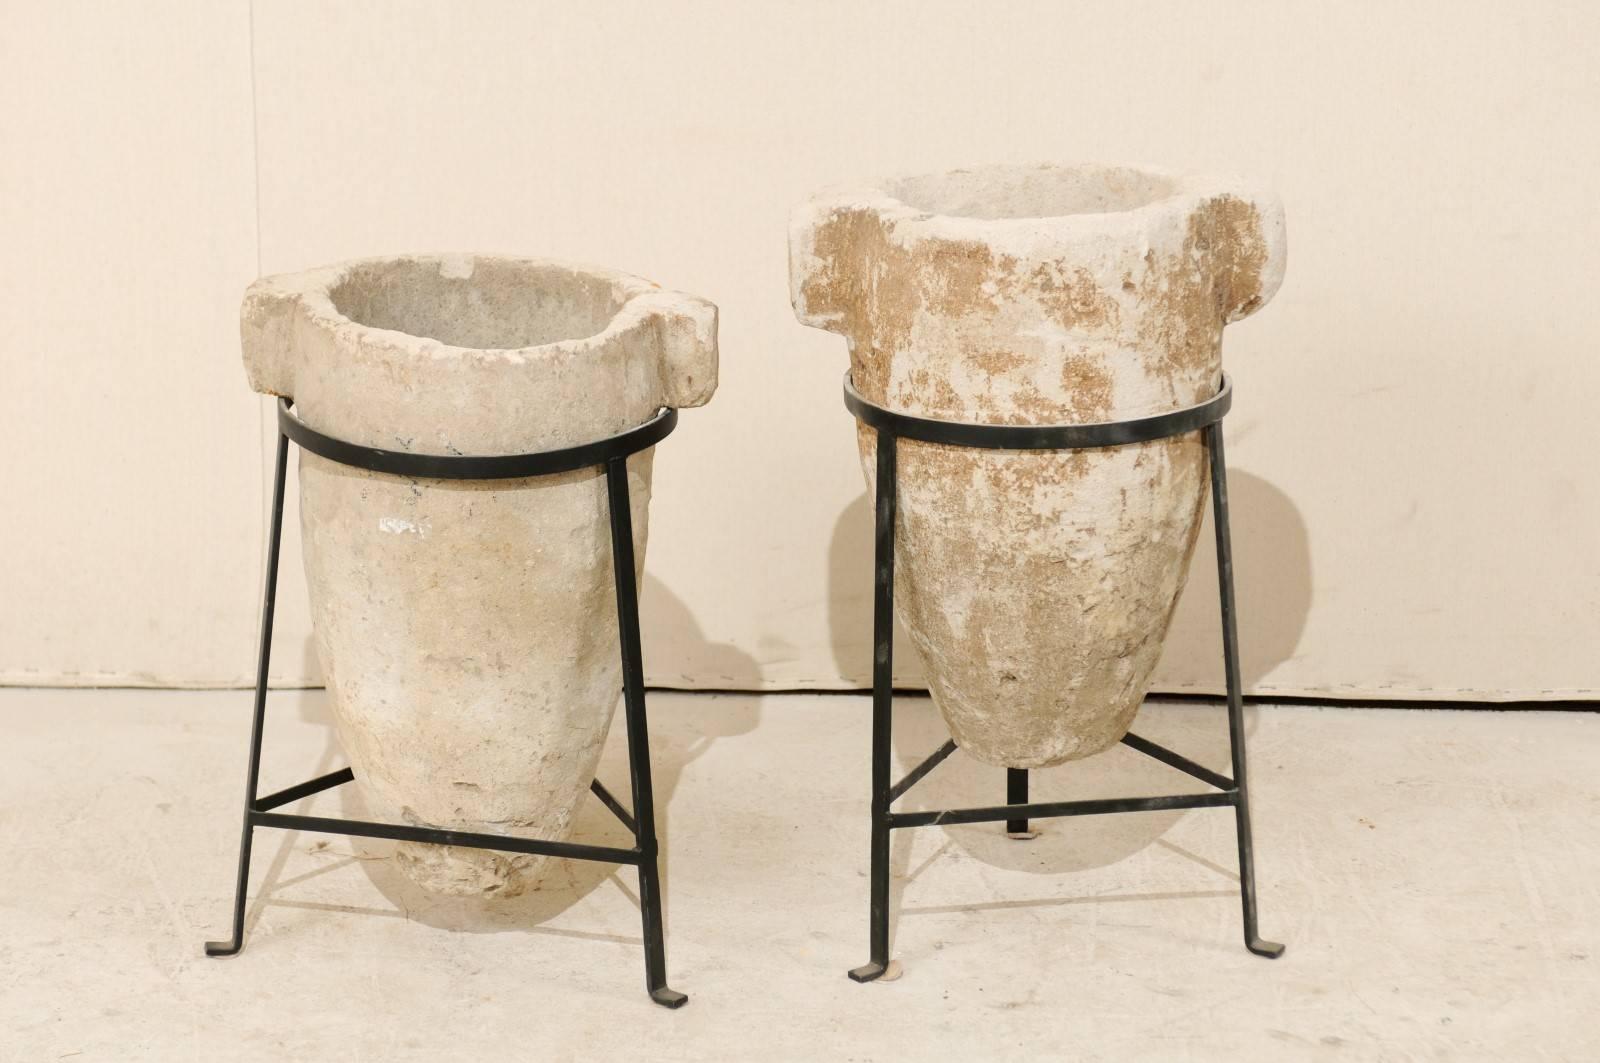 A pair of 19th century Spanish Colonial stone water filters on custom stands. This pair of Central American stone water filters from the early part of the mid-19th century are beautifully displayed in their custom black iron bases. These stone water